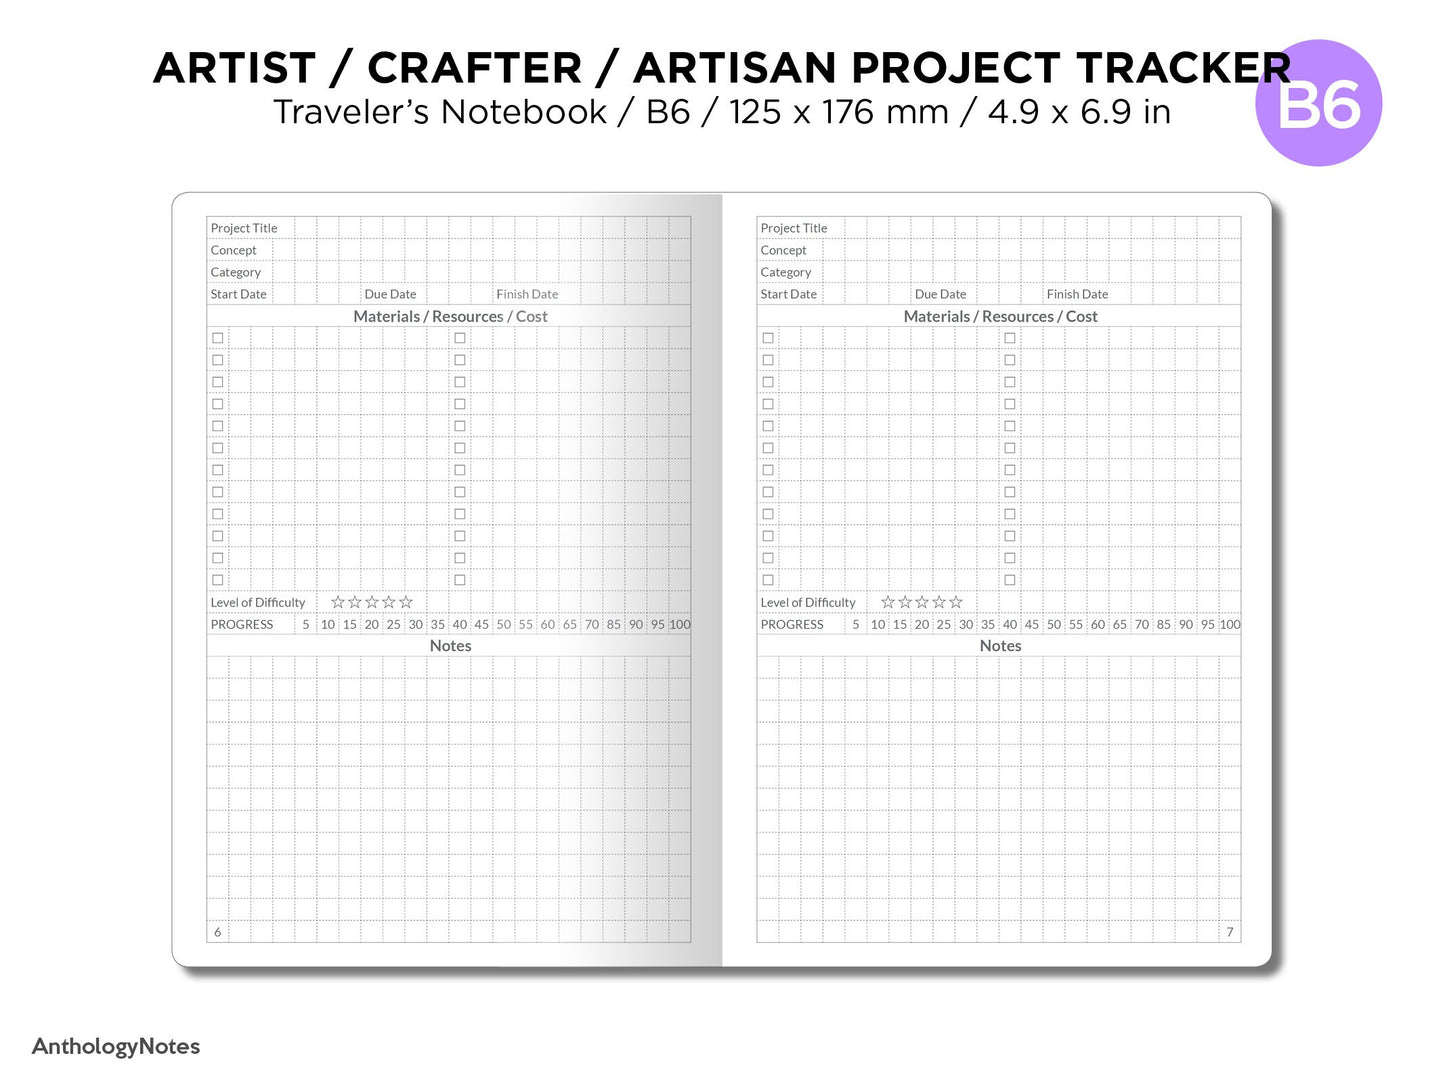 B6 Maker's PROJECT TRACKER for Artists Crafters Artisans Traveler's Notebook Printable Insert